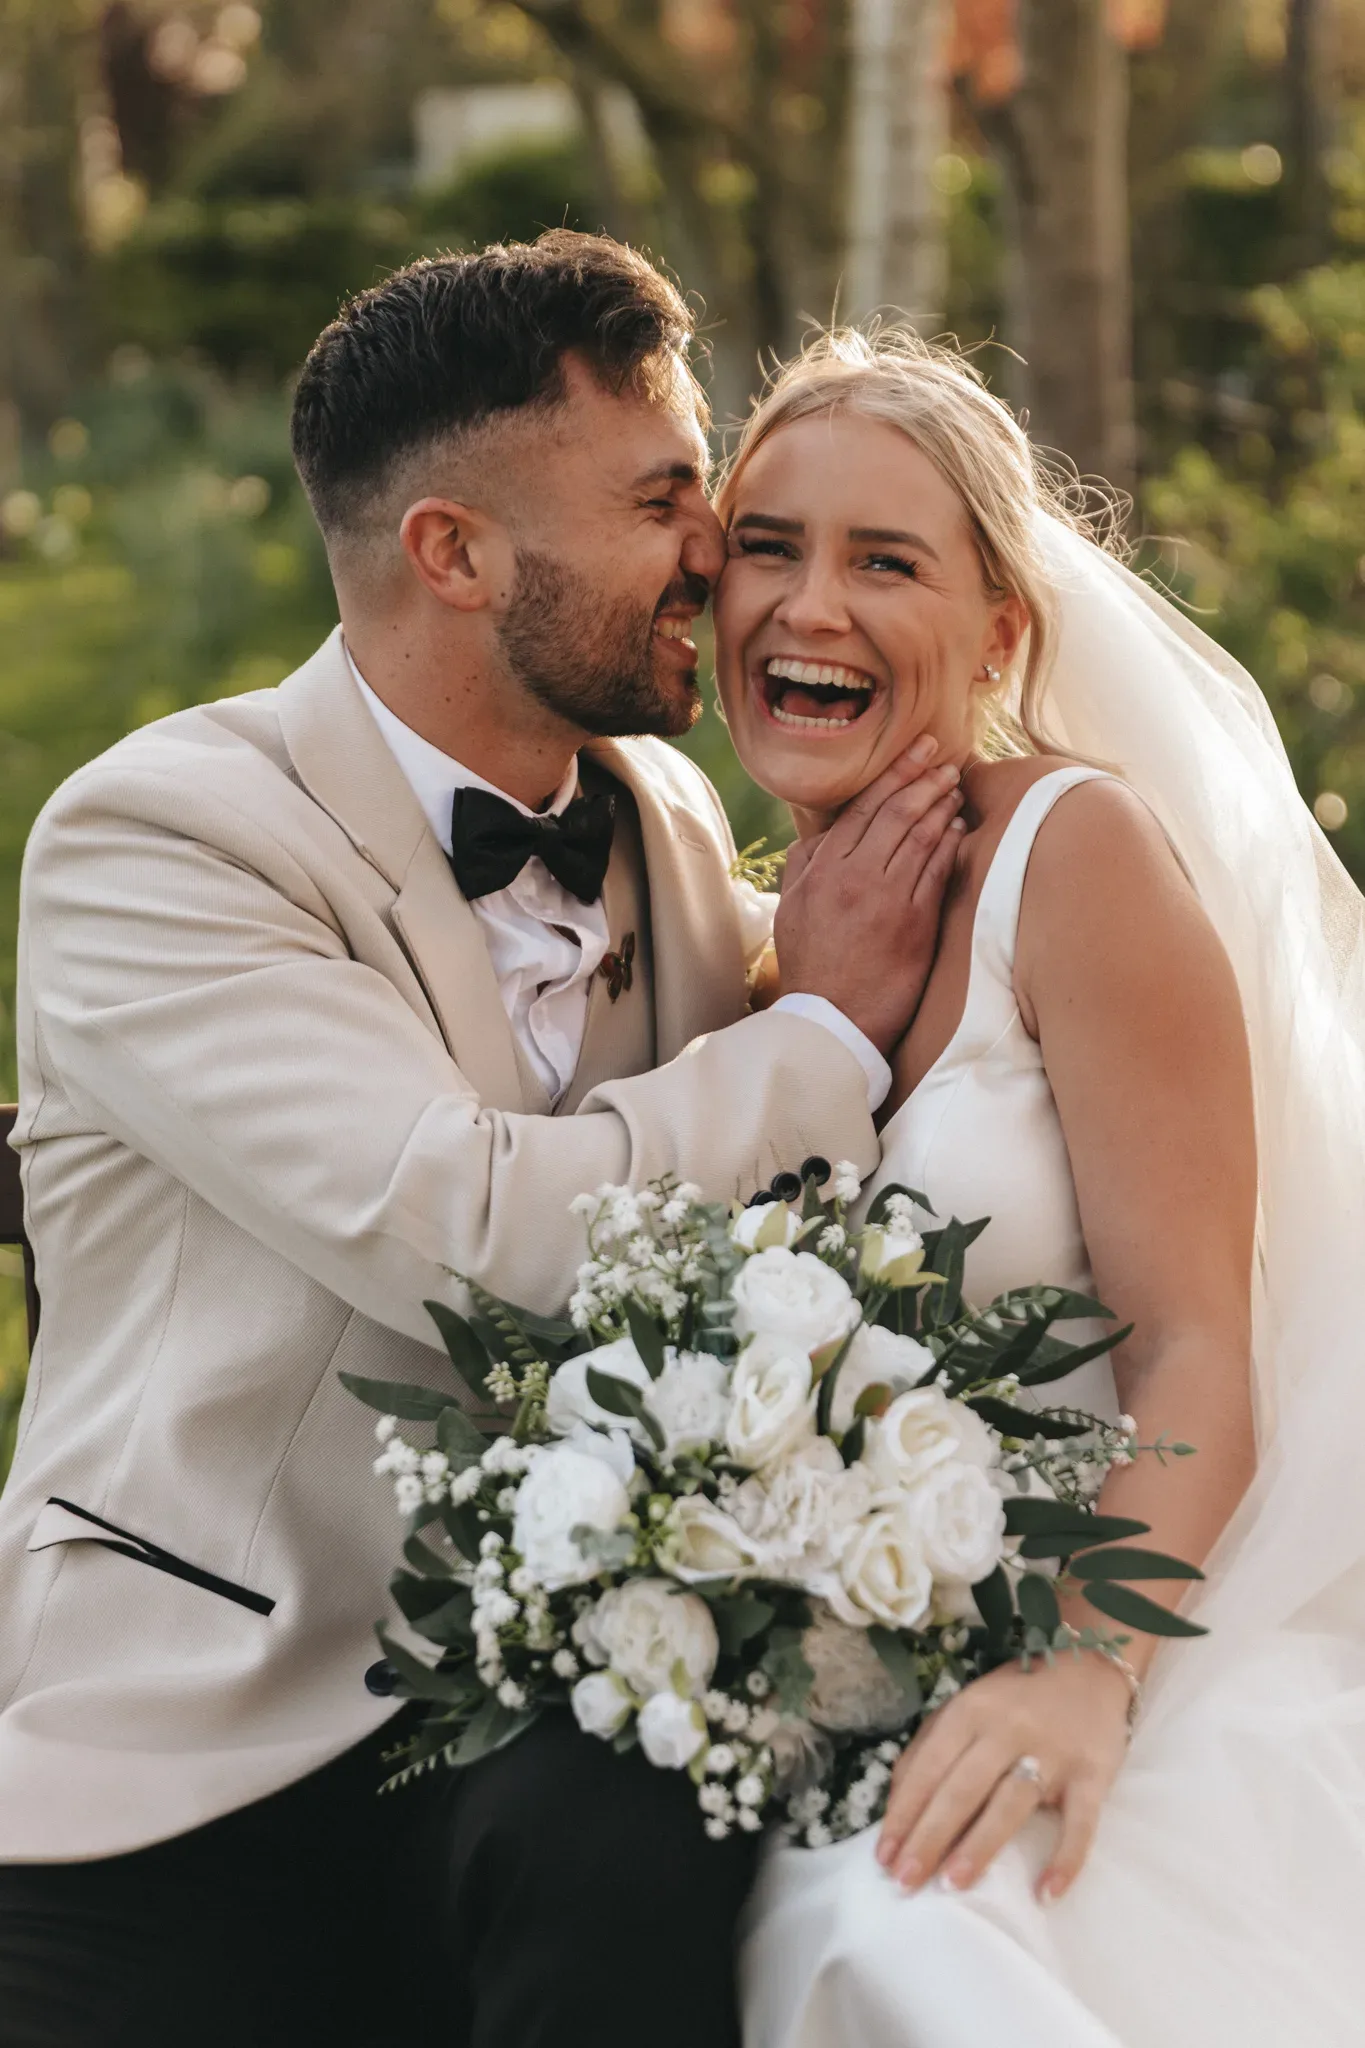 A joyful bride and groom laugh together outdoors. the bride, holding a bouquet of white flowers, wears a white gown, and the groom is in a cream suit and black bow tie. sunlight filters through trees in the background.